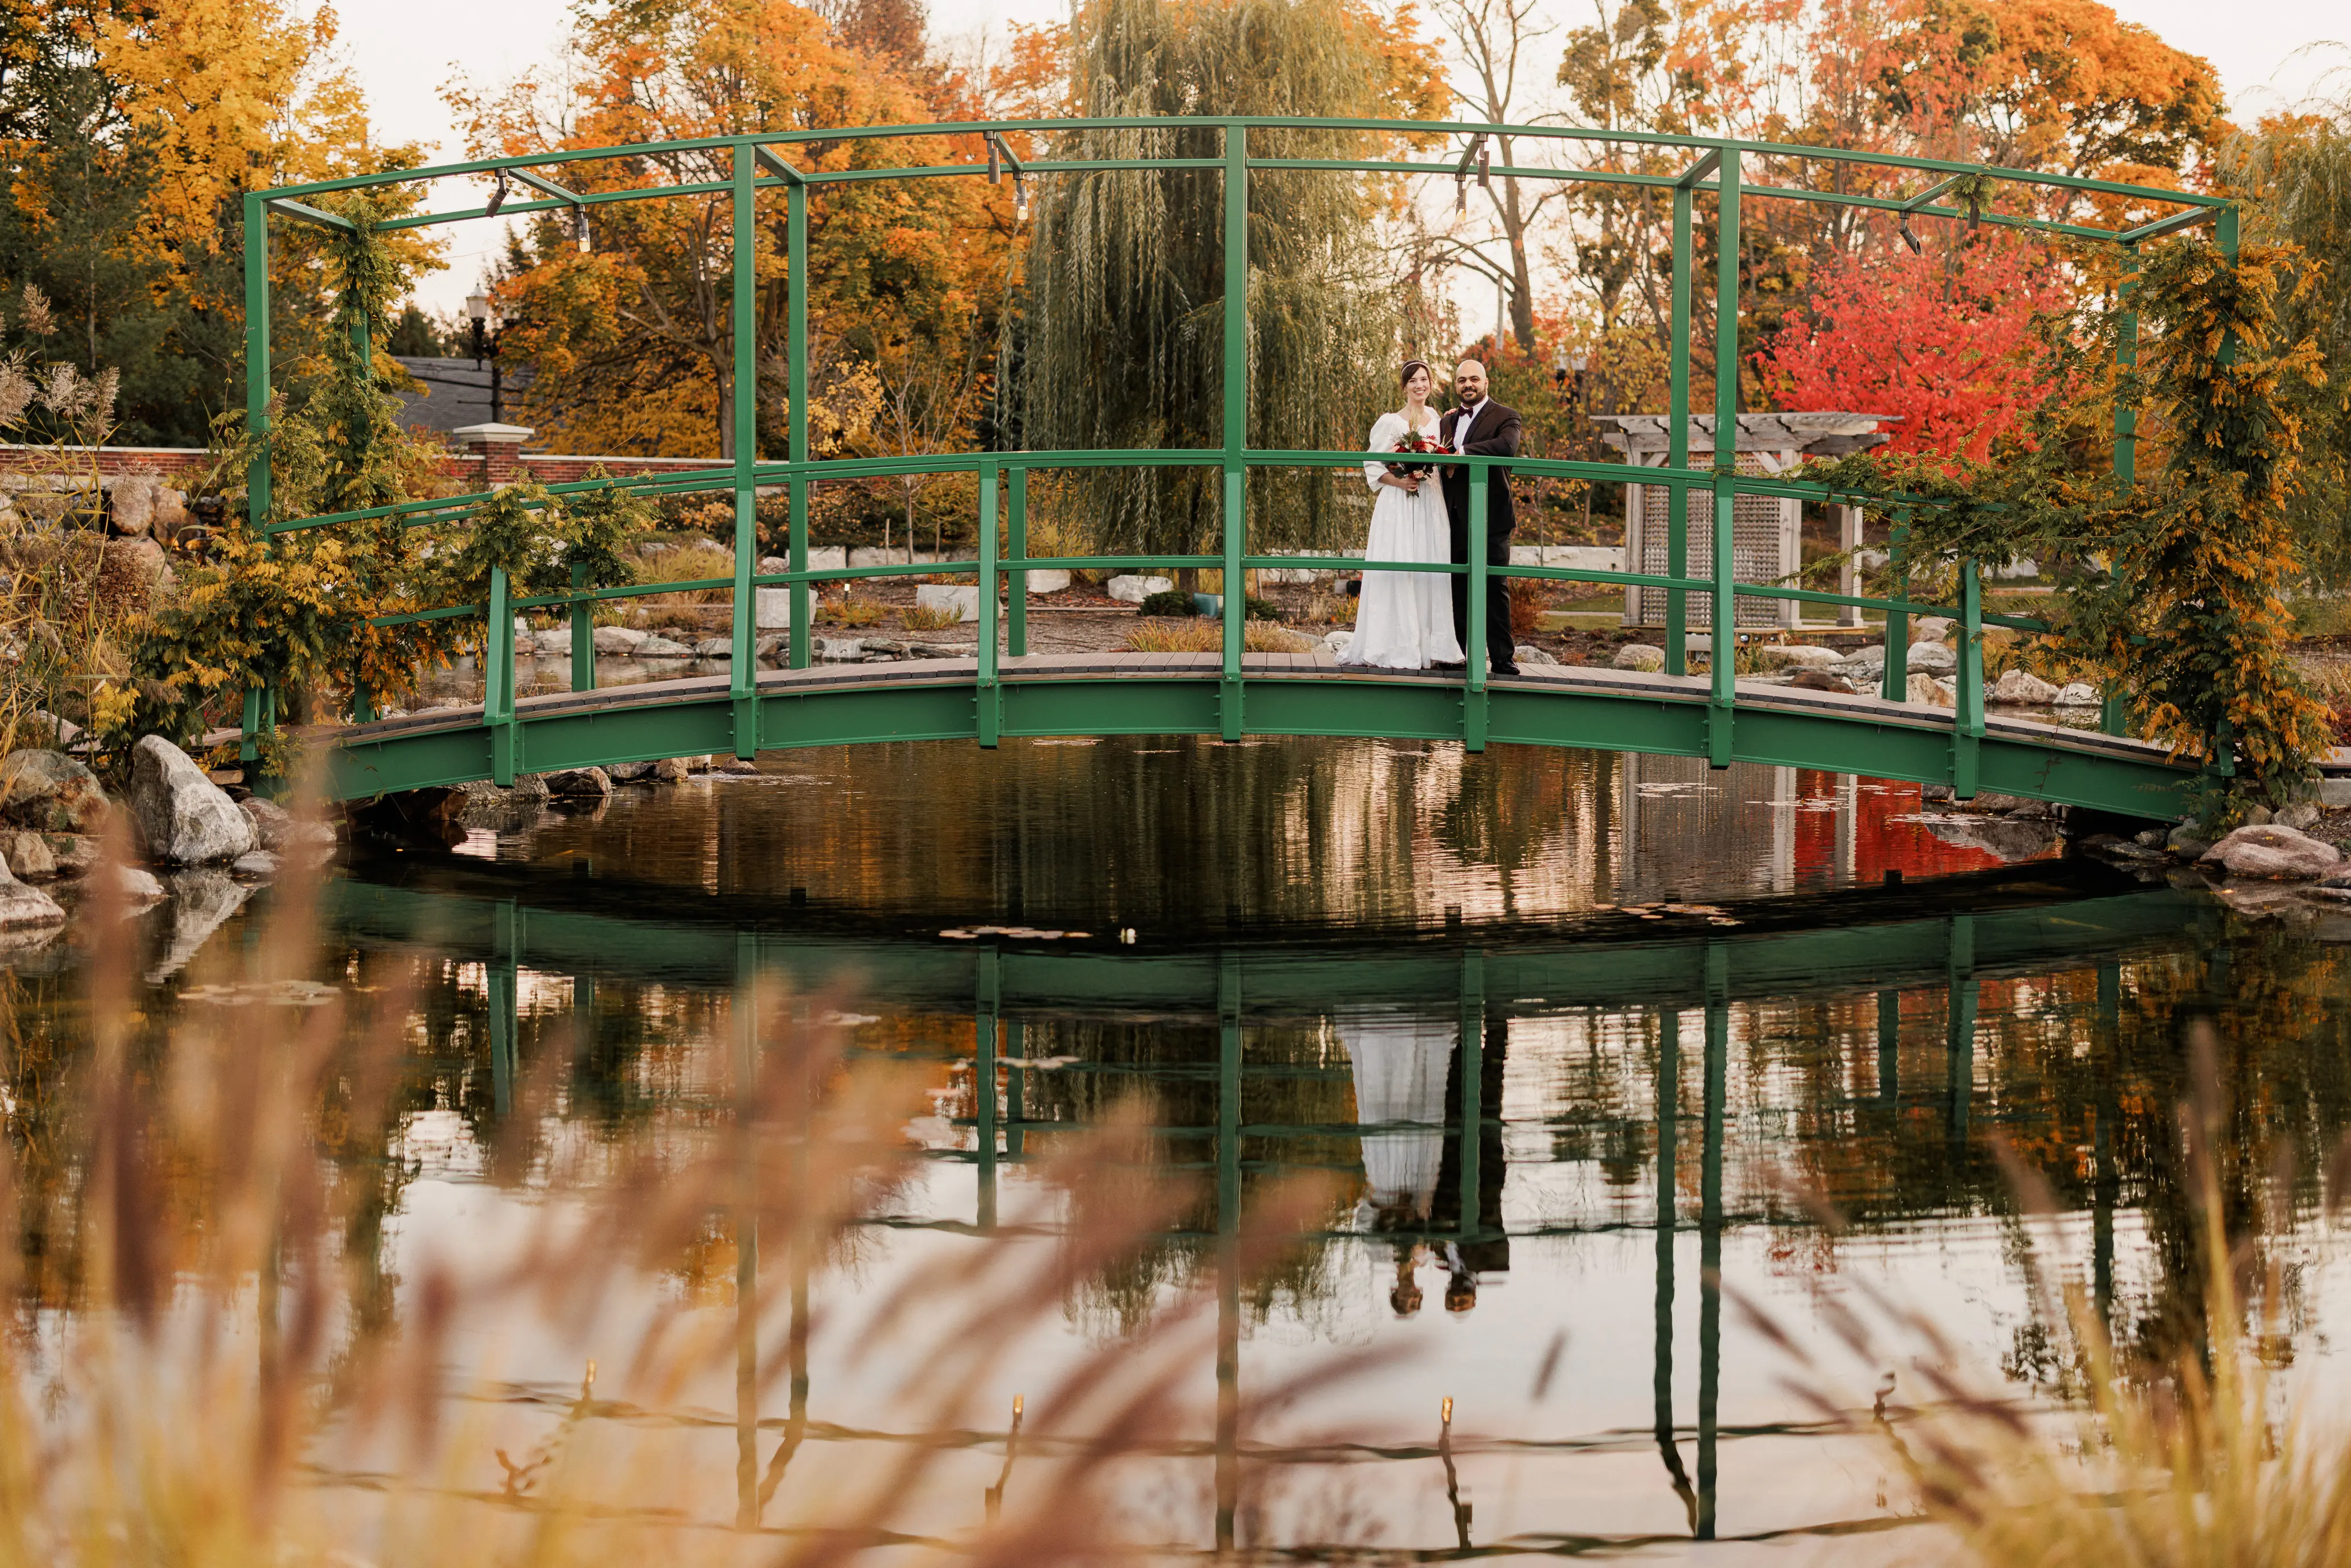 When’s the best month for an outdoor wedding in Ontario?